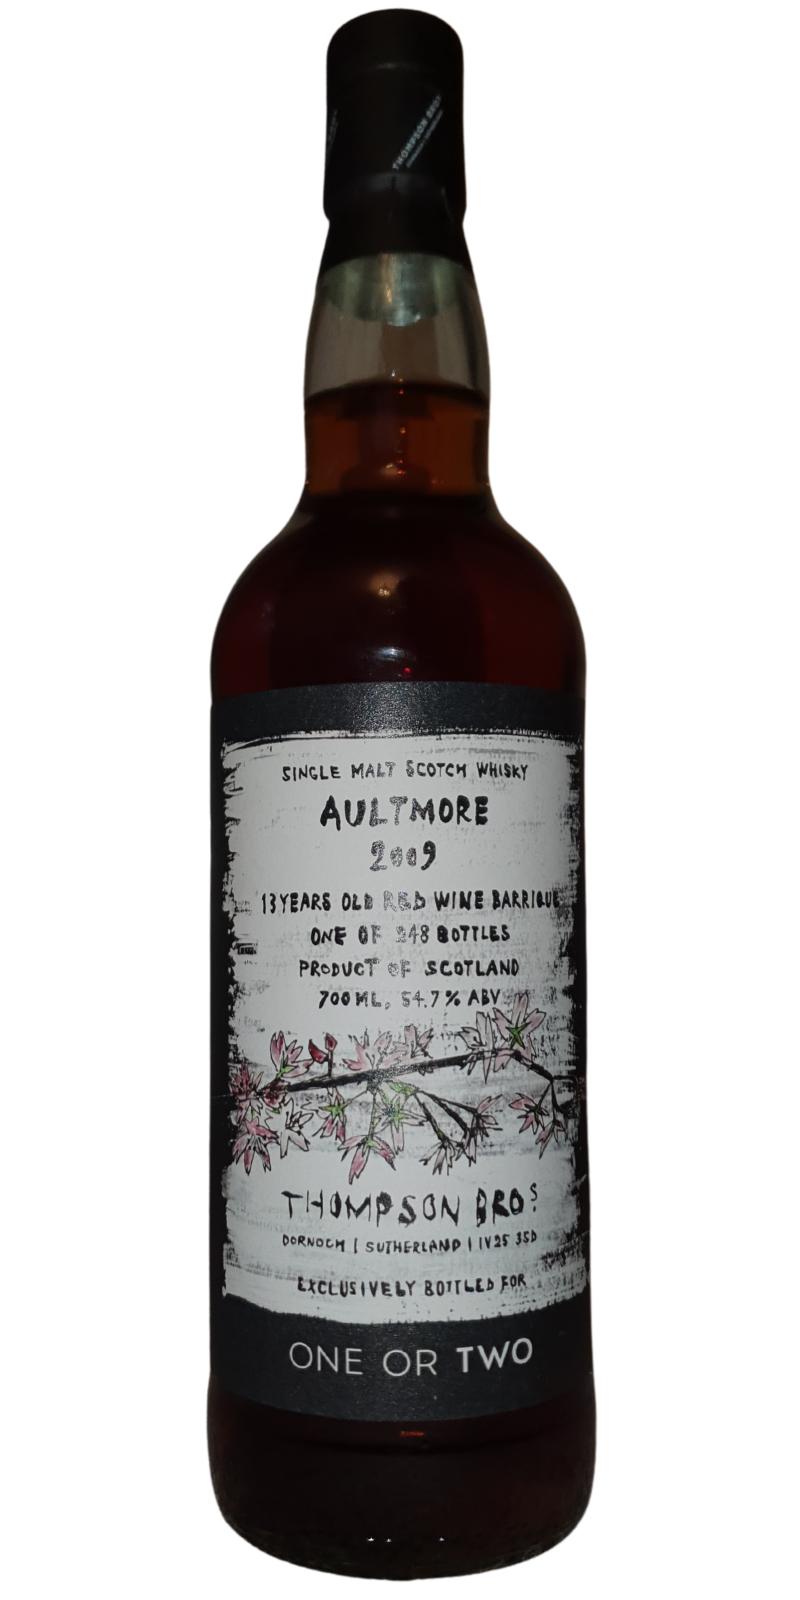 Aultmore 2009 PST Red Wine Barrique One or Two bar in Melbourne 54.7% 700ml